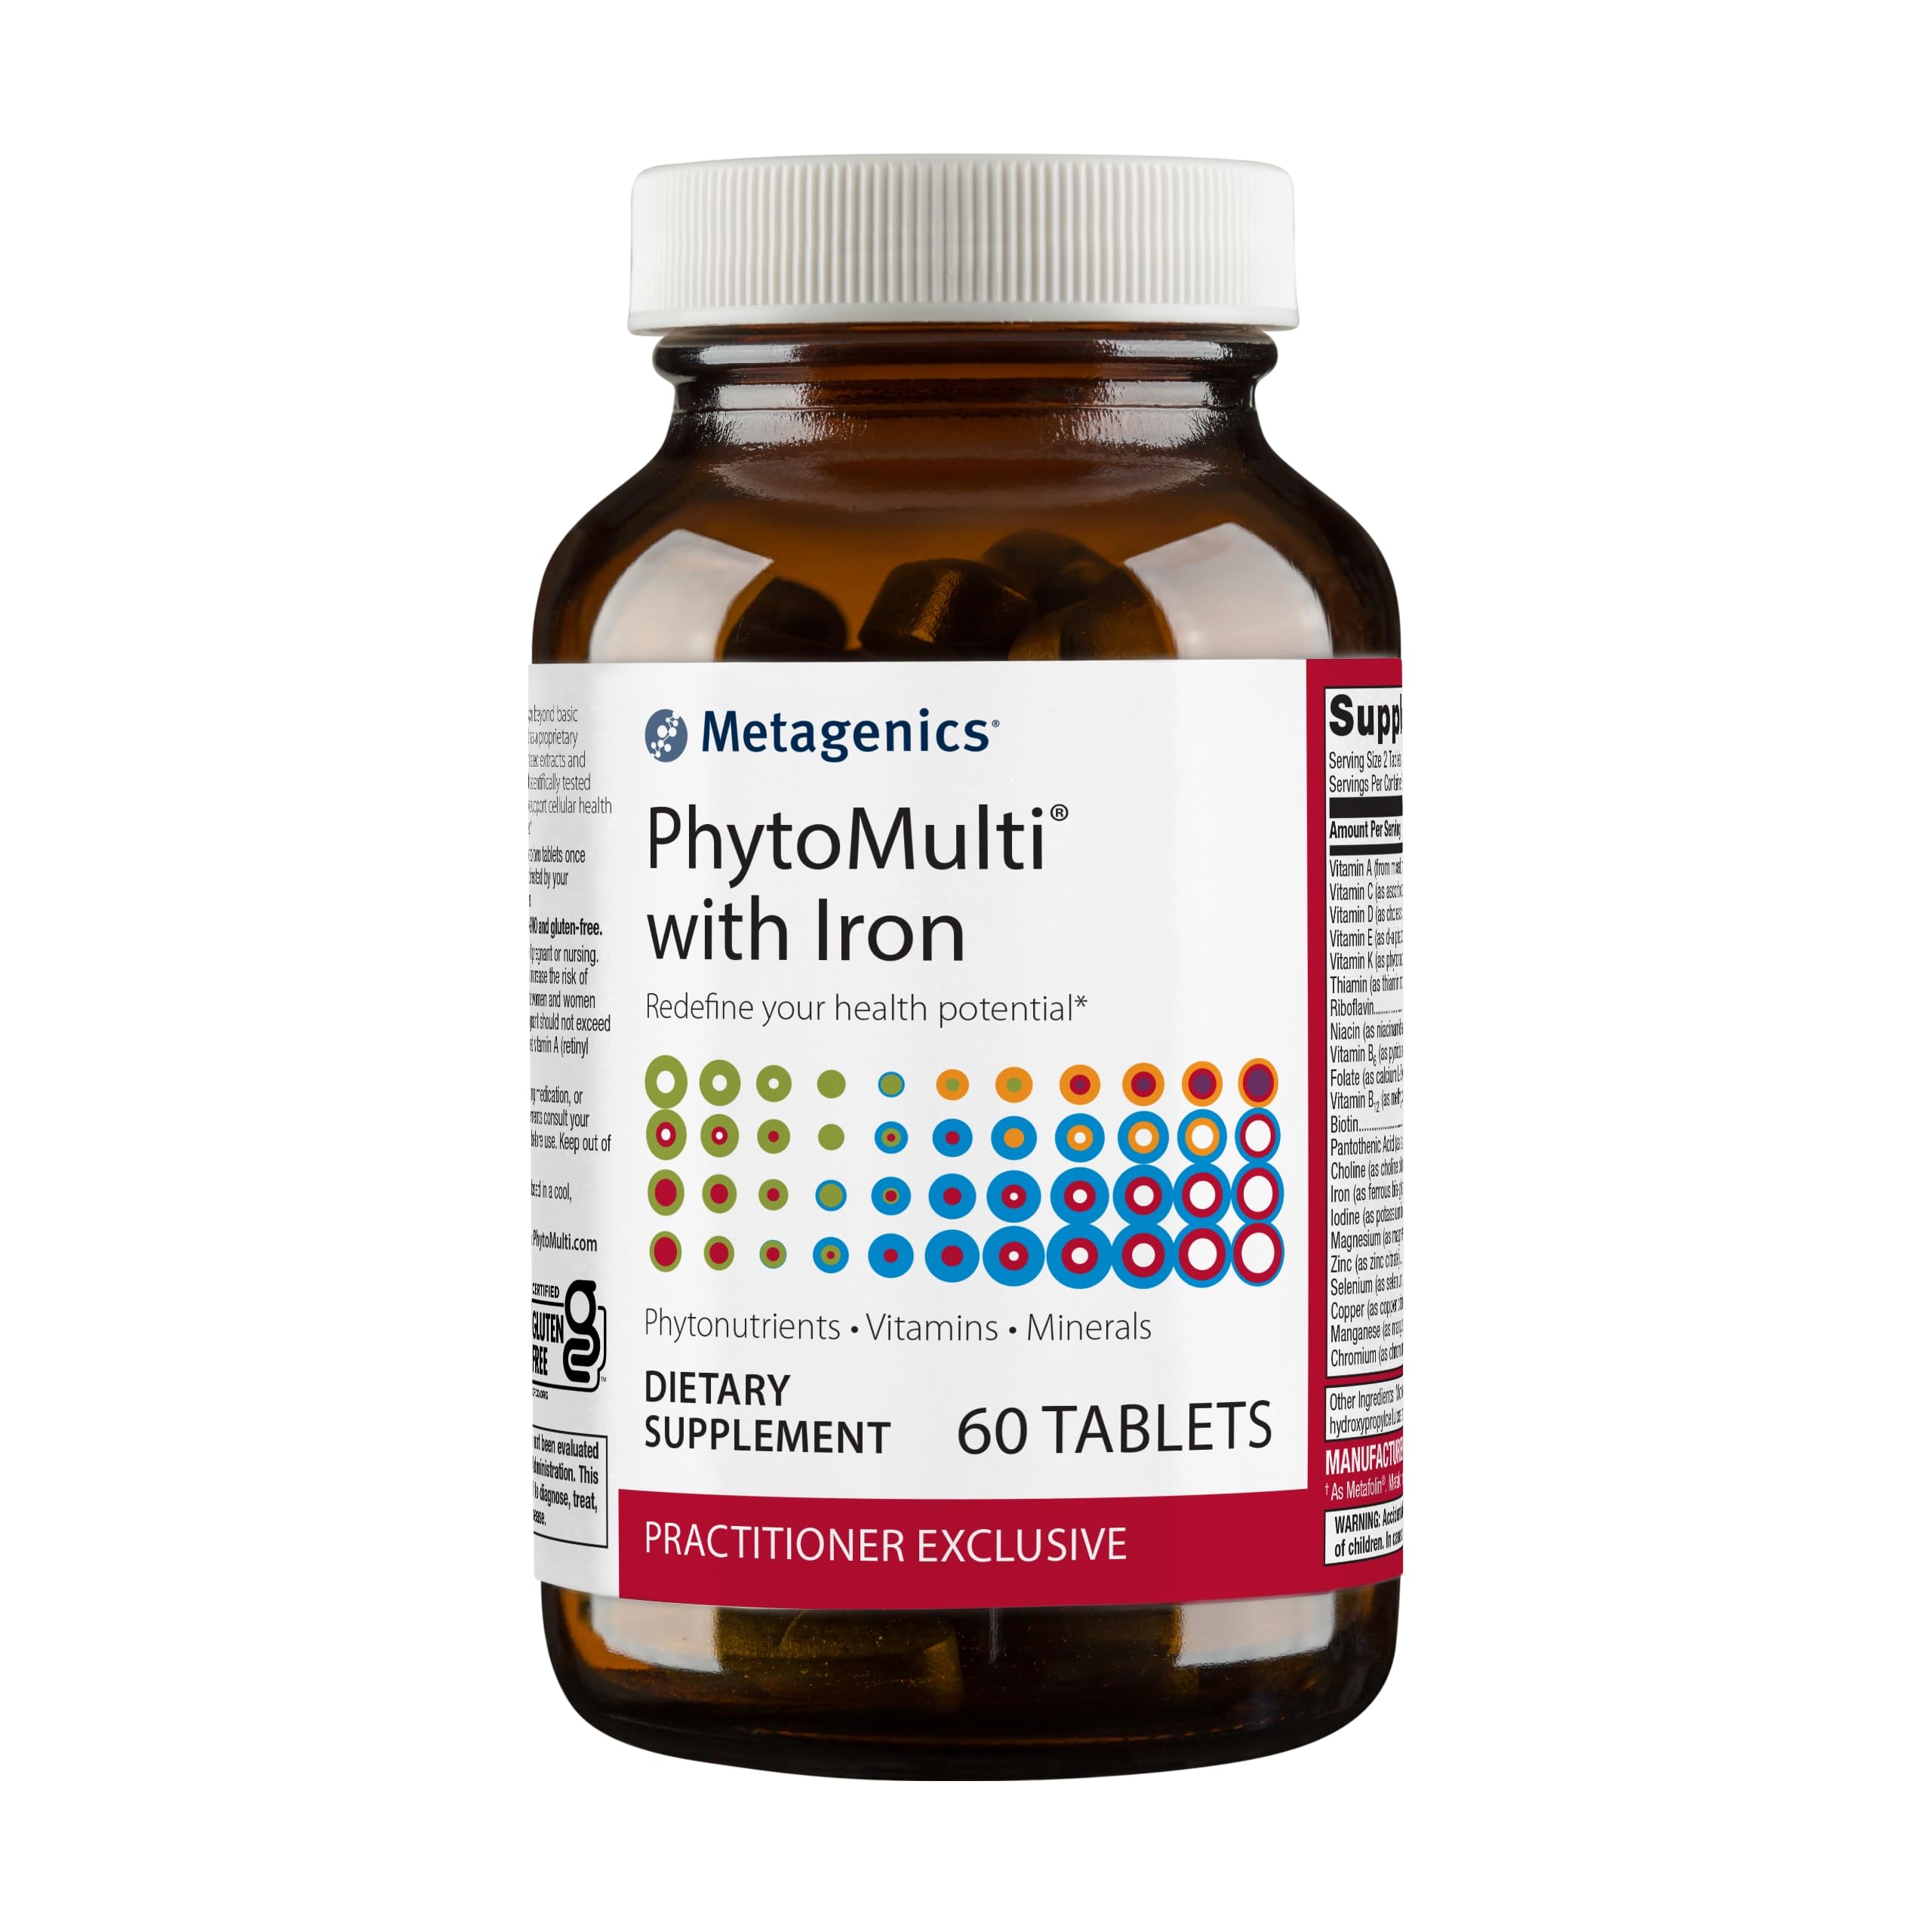 Metagenics PhytoMulti with Iron Daily Multivitamin - 60 Tablets